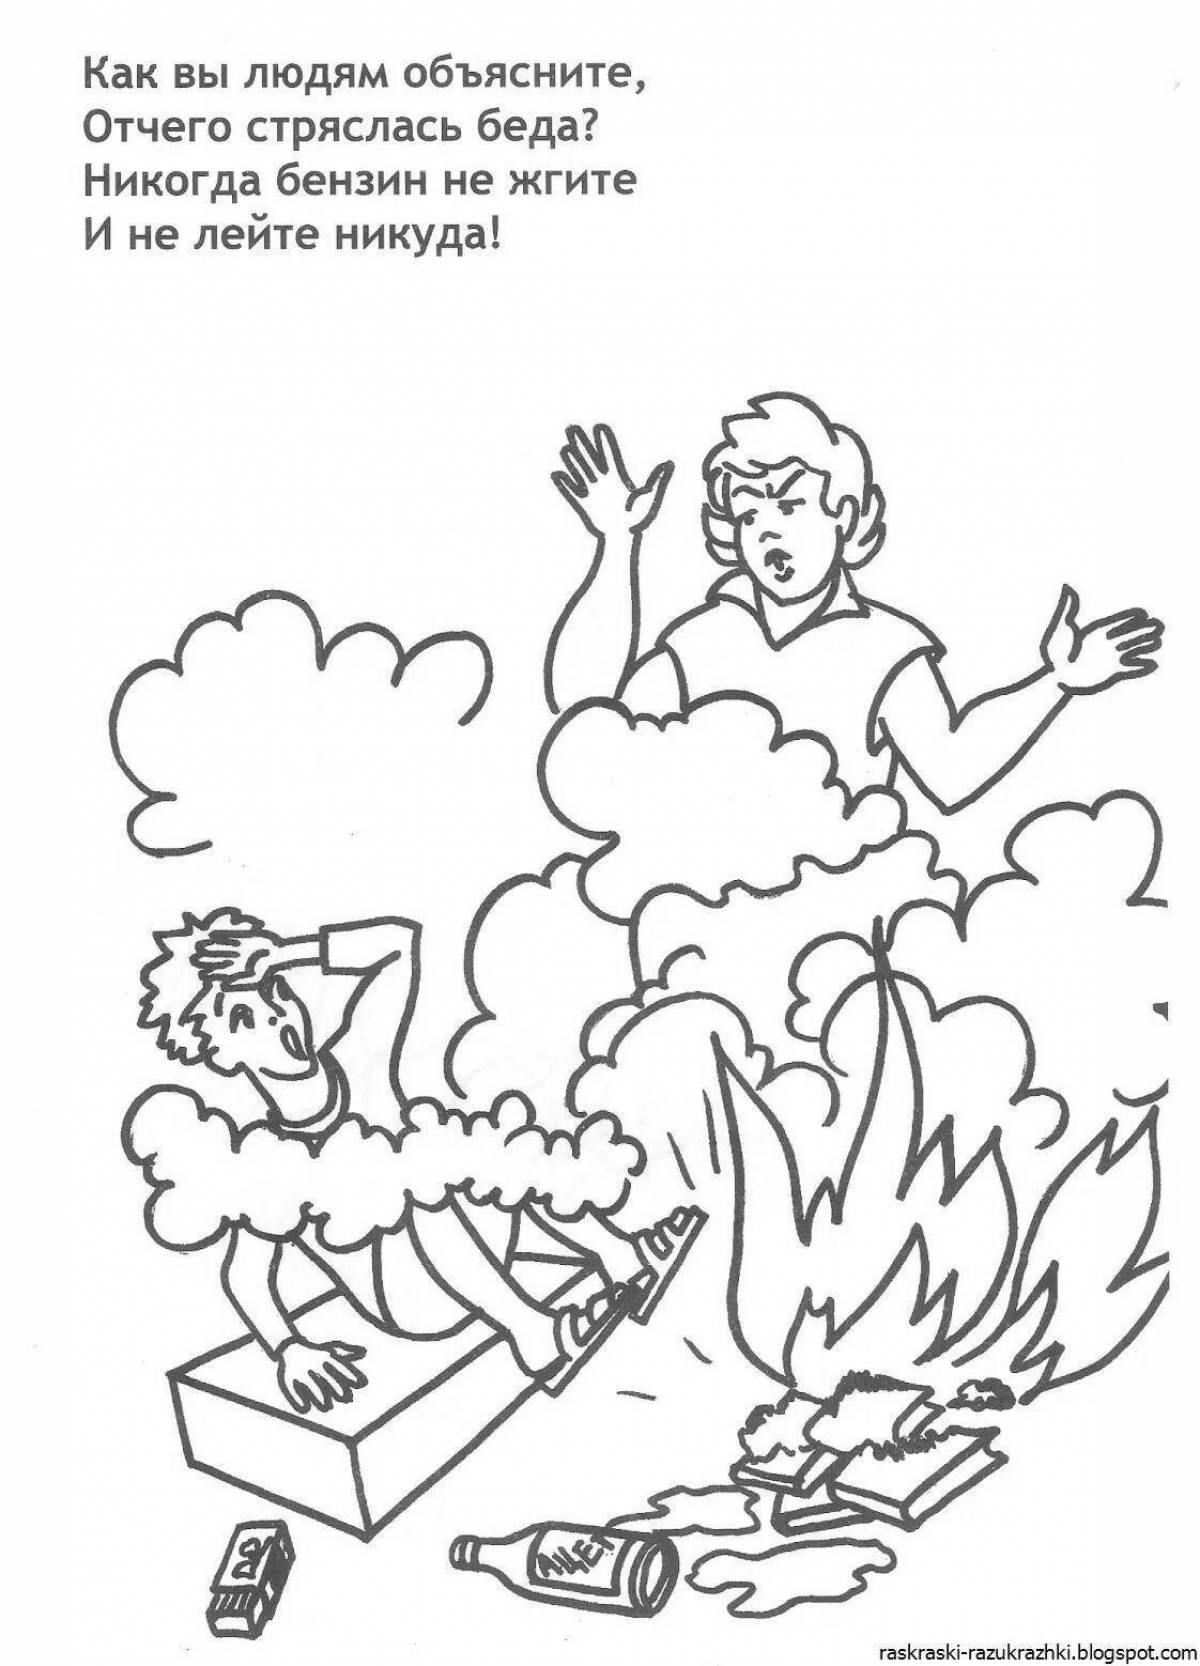 Tempting fire safety coloring book for kindergarten